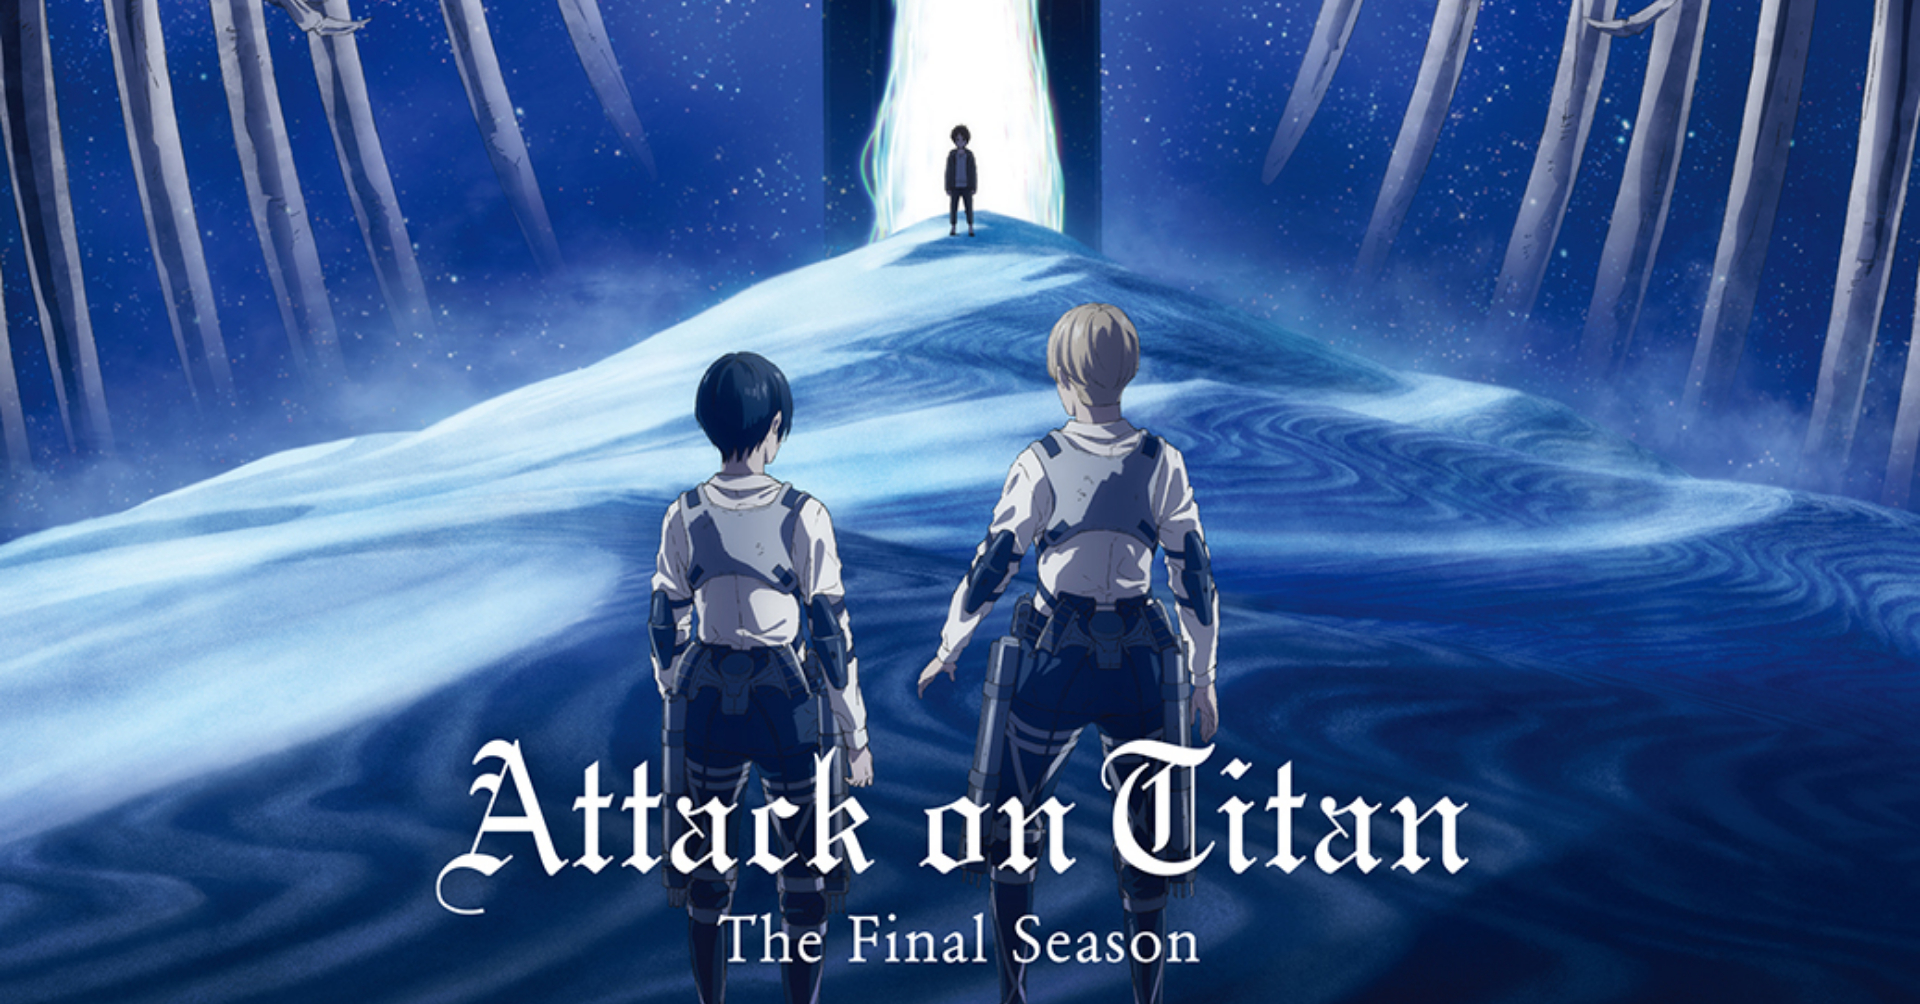 Will There Be A Season 5 Of Attack On Titan? - The Teal Mango